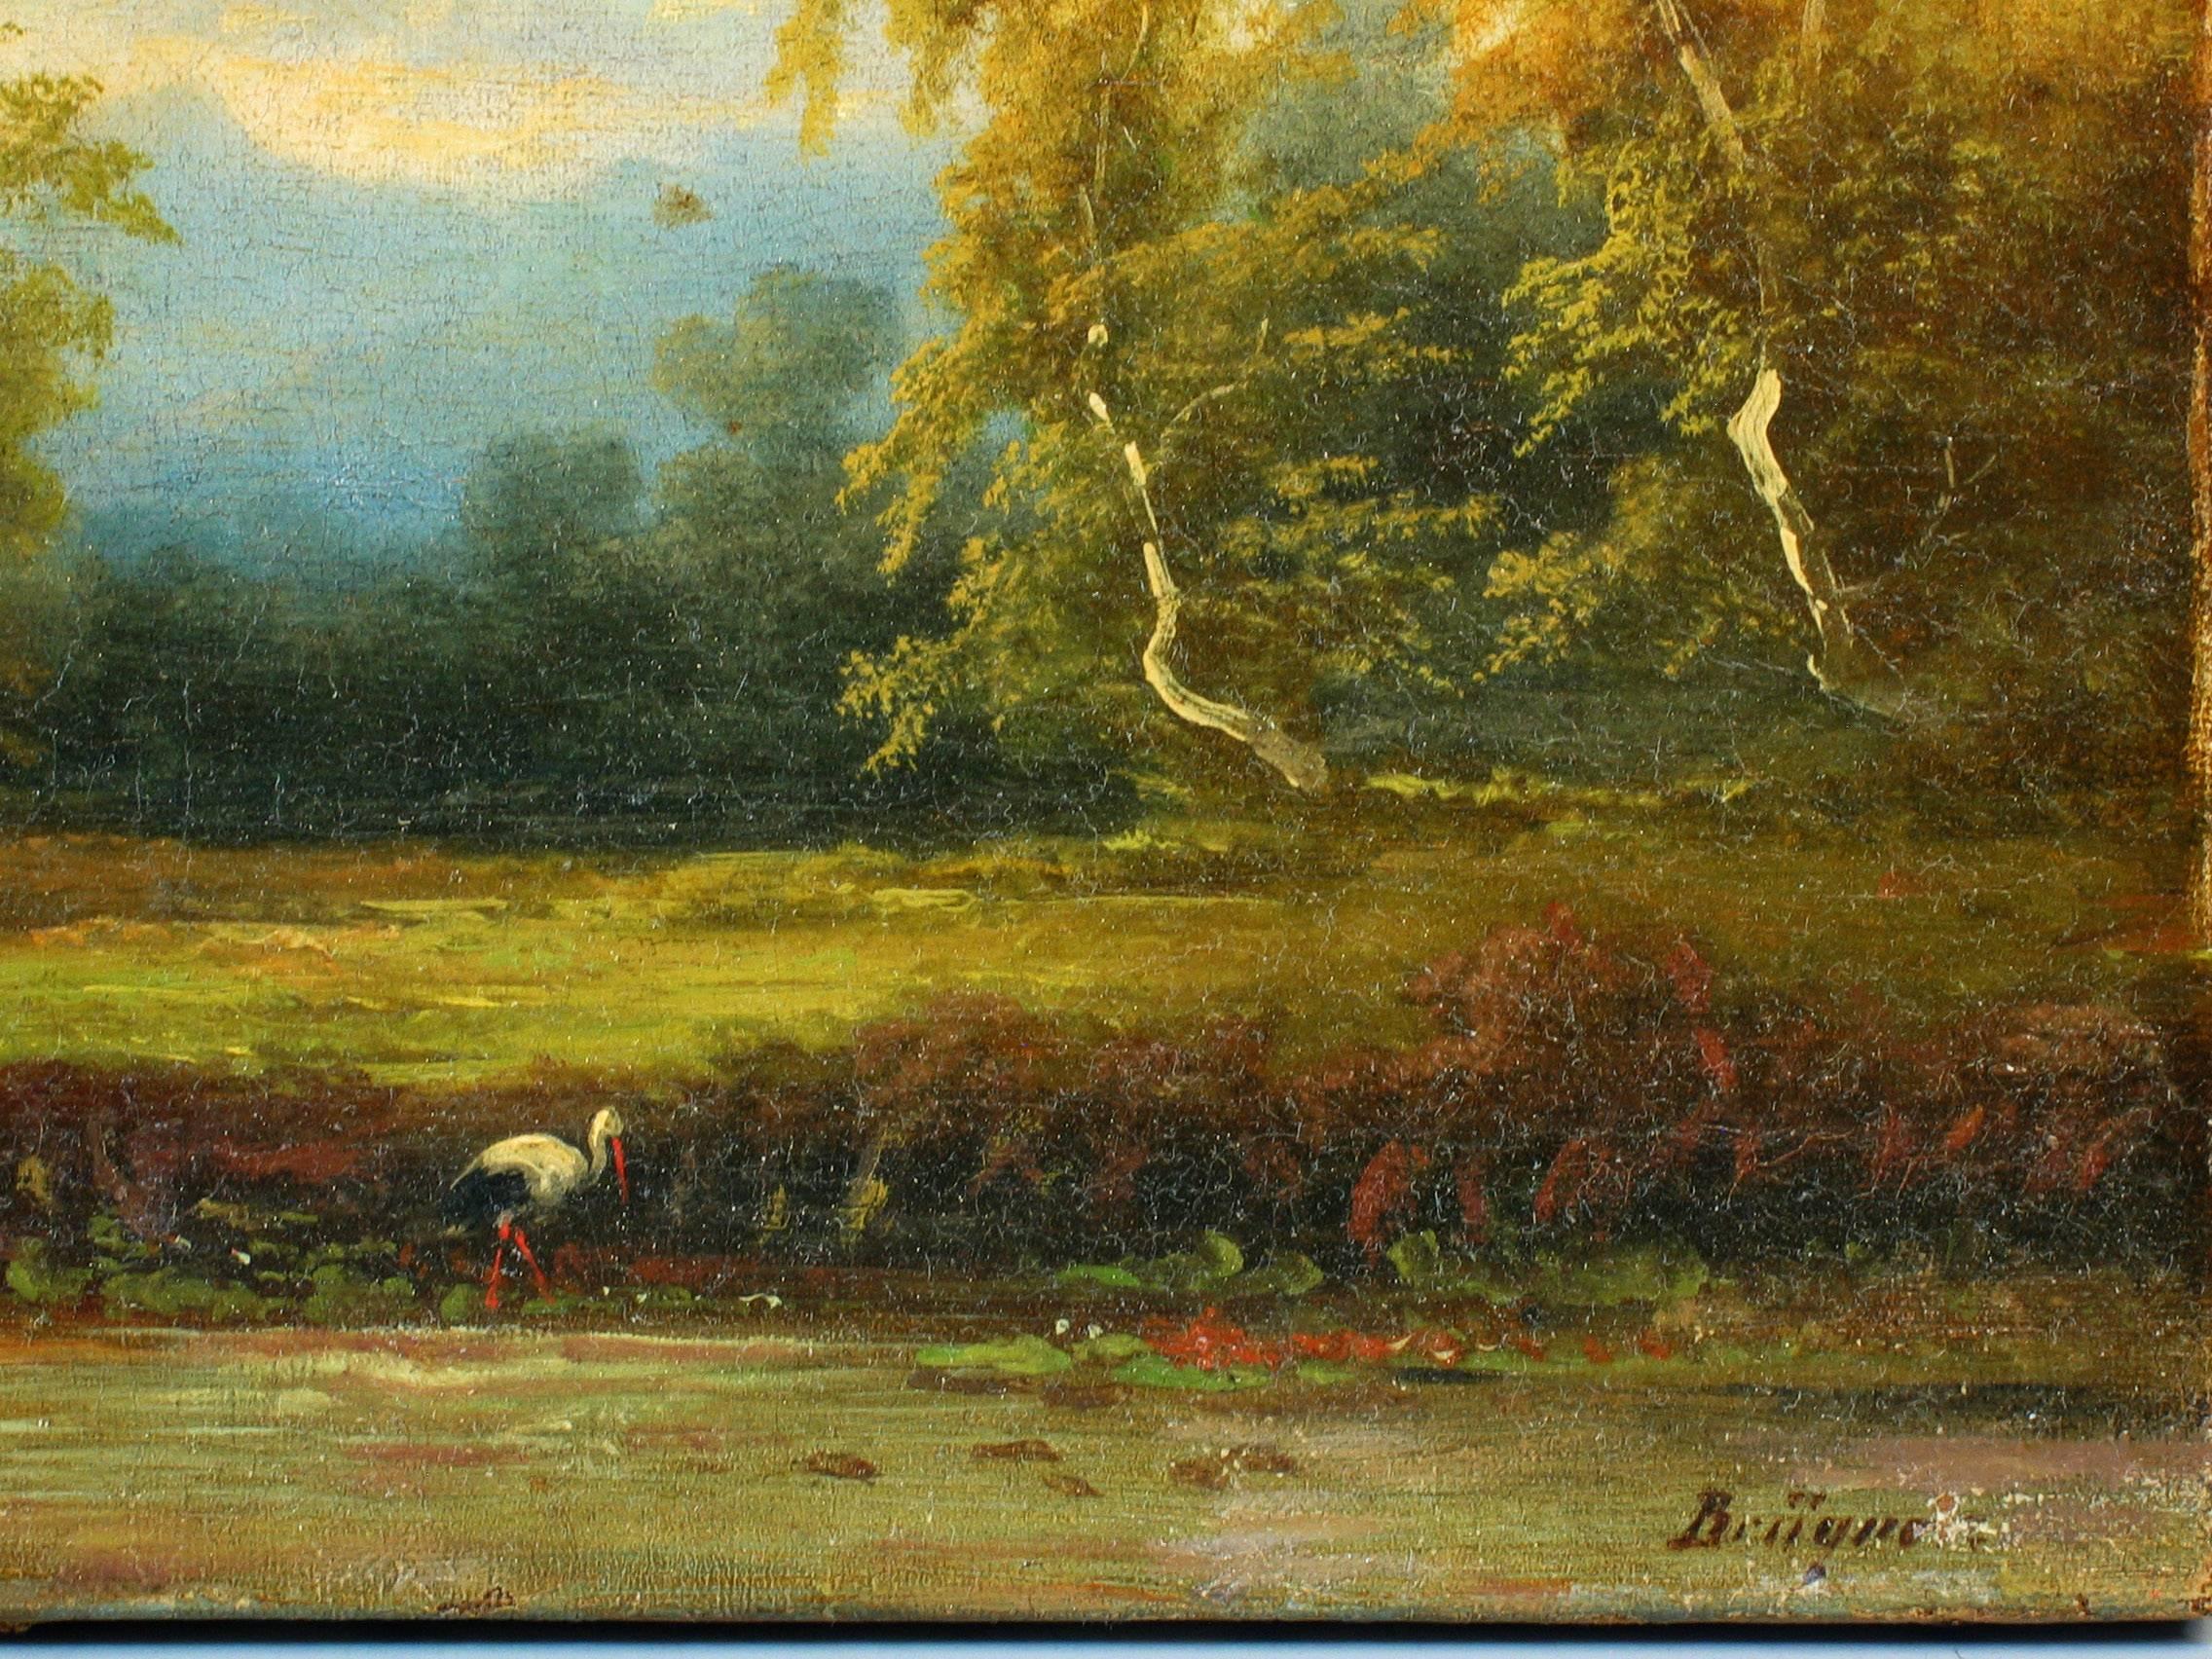 Paint Coelestin Brugner Landscape with a Stork by the Water For Sale